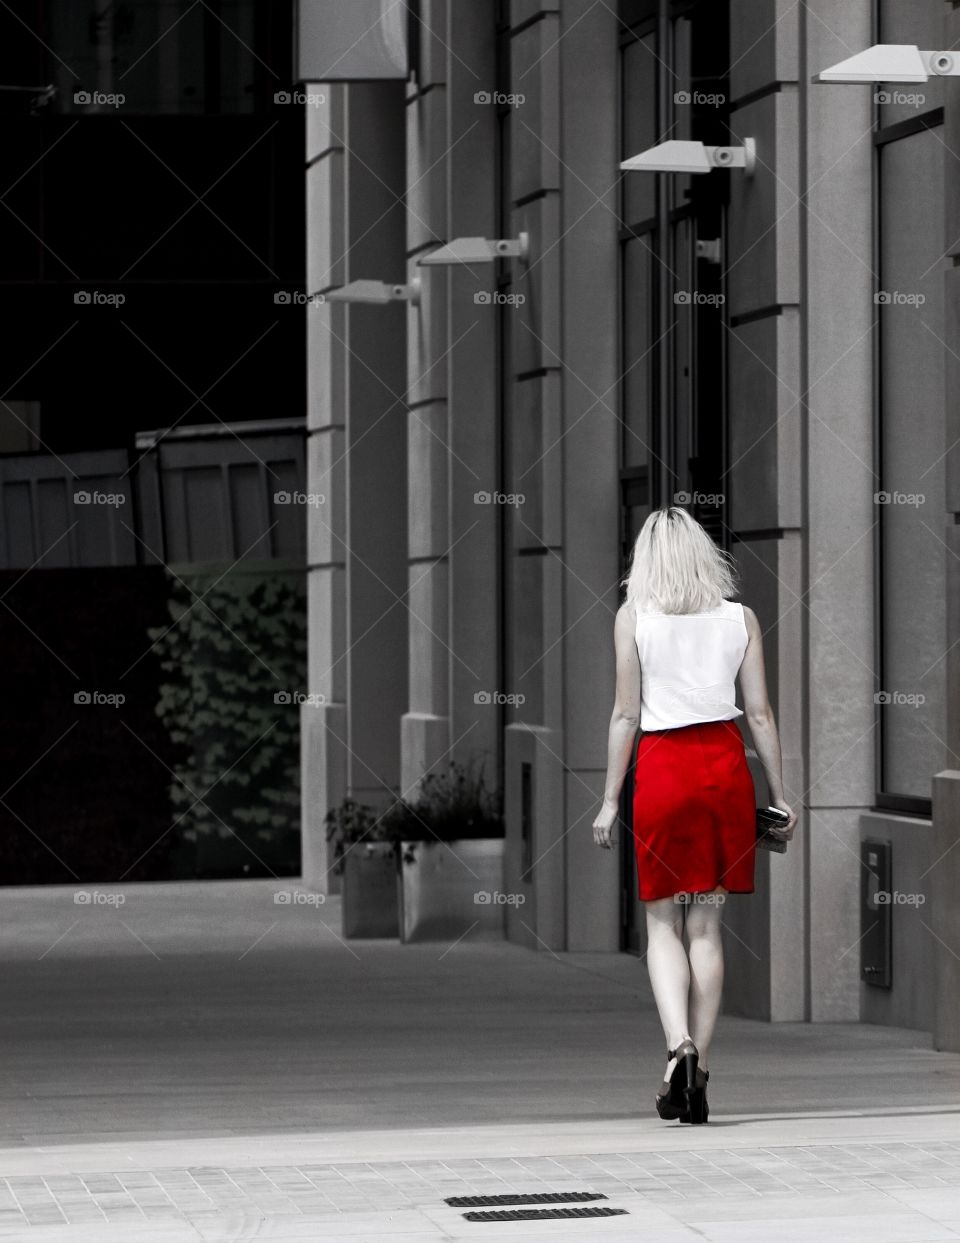 A single woman with a red skirt walking alone down a deserted alley way.